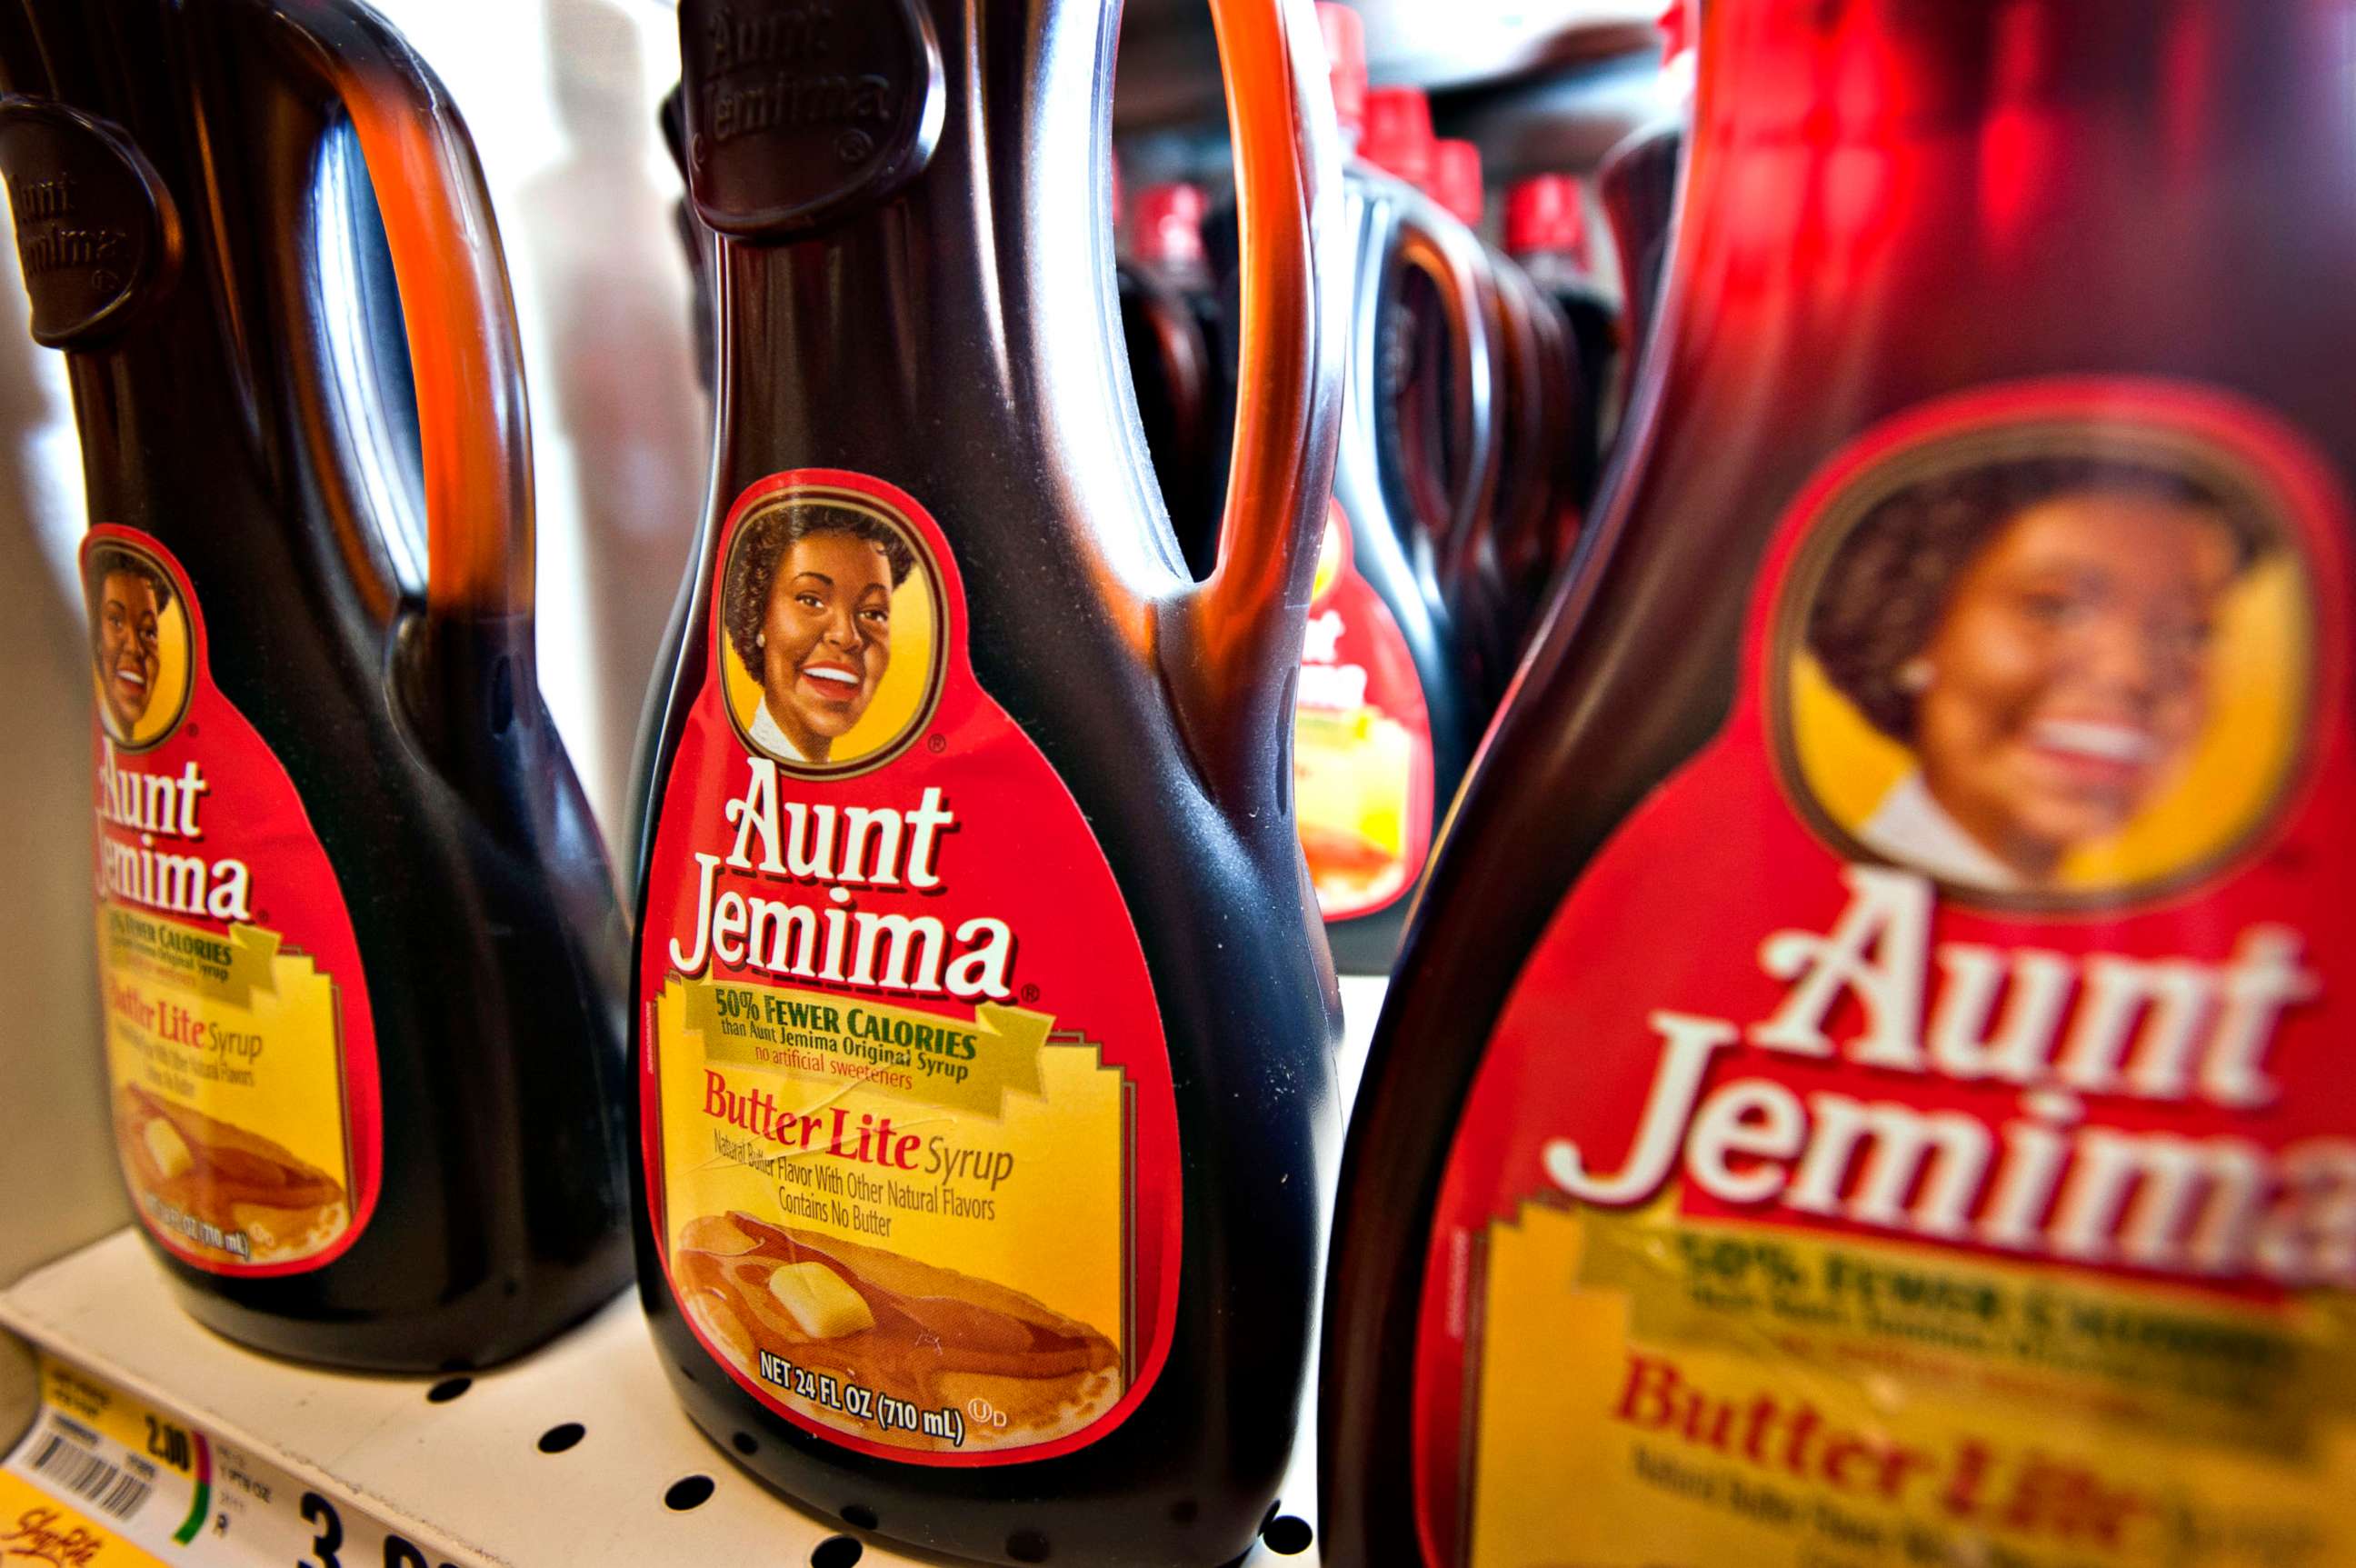 PHOTO: Bottles of Aunt Jemima syrup are displayed for sale.